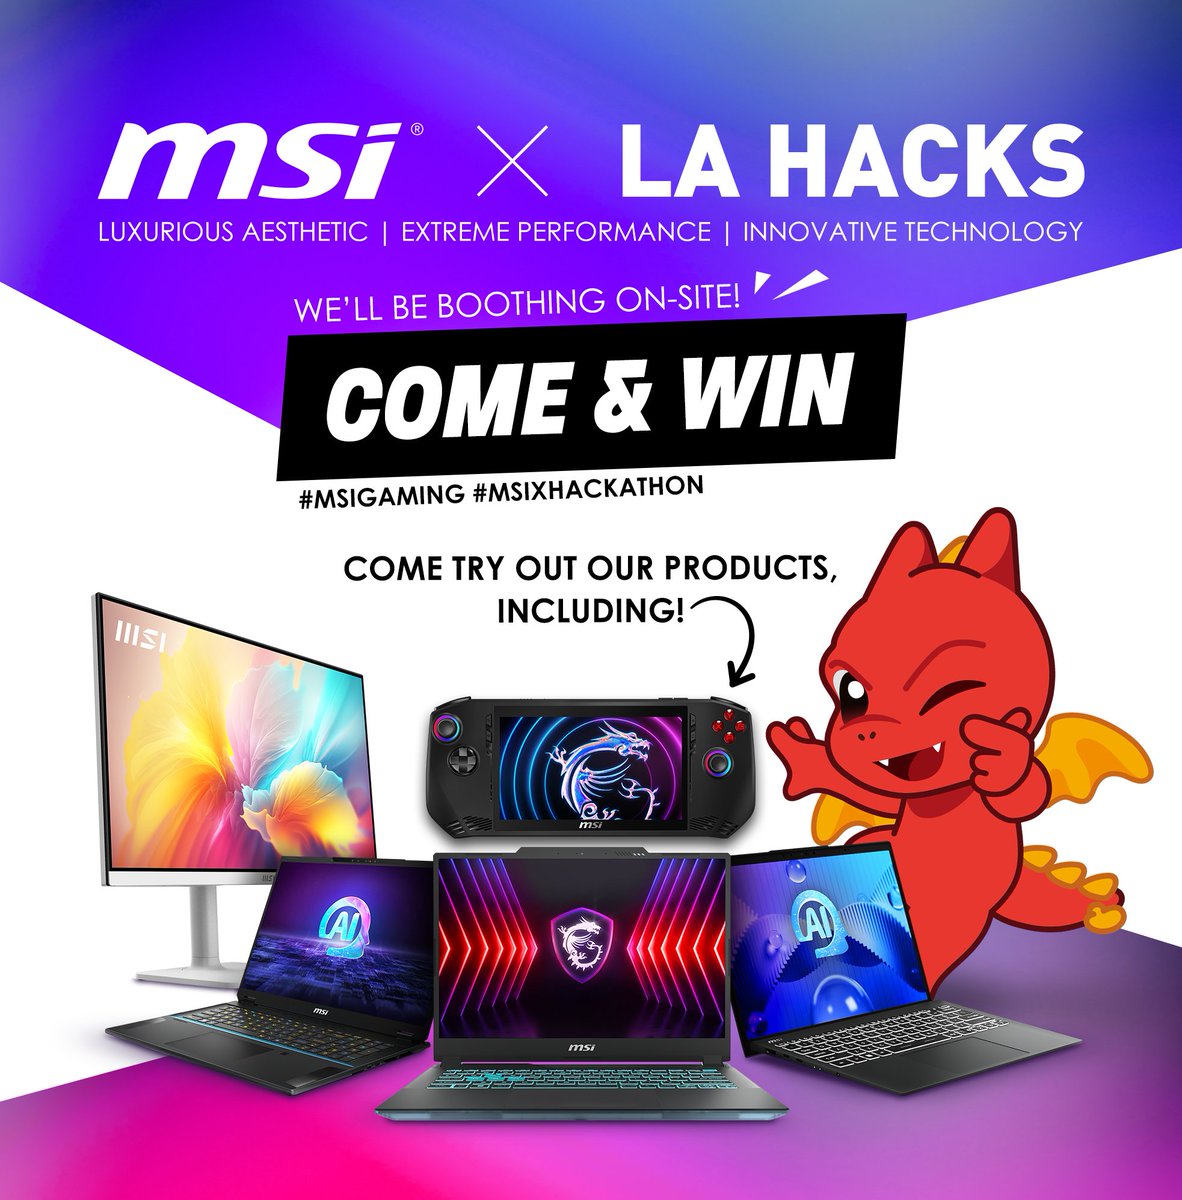 ATT: STUDENTS WE'RE OUT HERE AT @LAHacks THIS WEEKEND!! Come by to demo our stuff but to WIN things (or win our laptops if you get first place)! ✨ More info on their site: lahacks.com